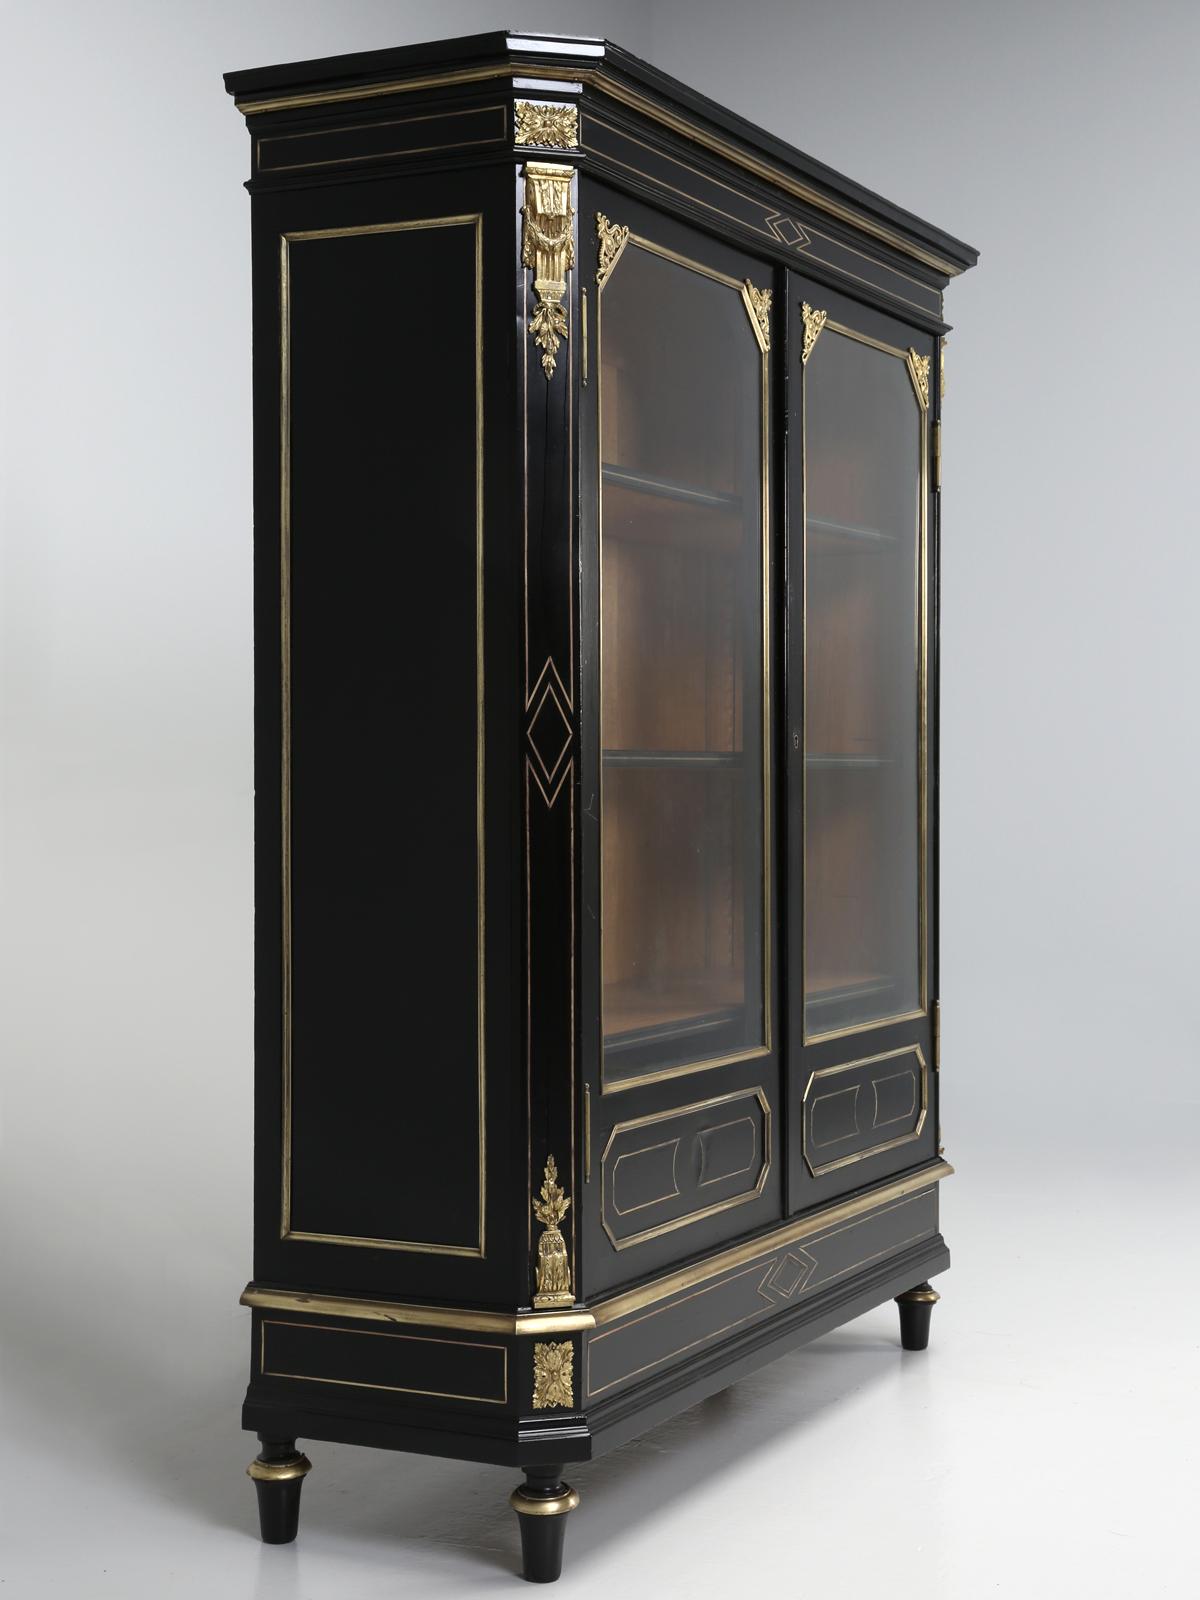 Antique French Louis XVI style black display case, curio cabinet, vitrine or bookcase and I think all the descriptions are applicable. The French expert, described this as Louis XVI style, Époque Napoléon III, which translates to the “time” of